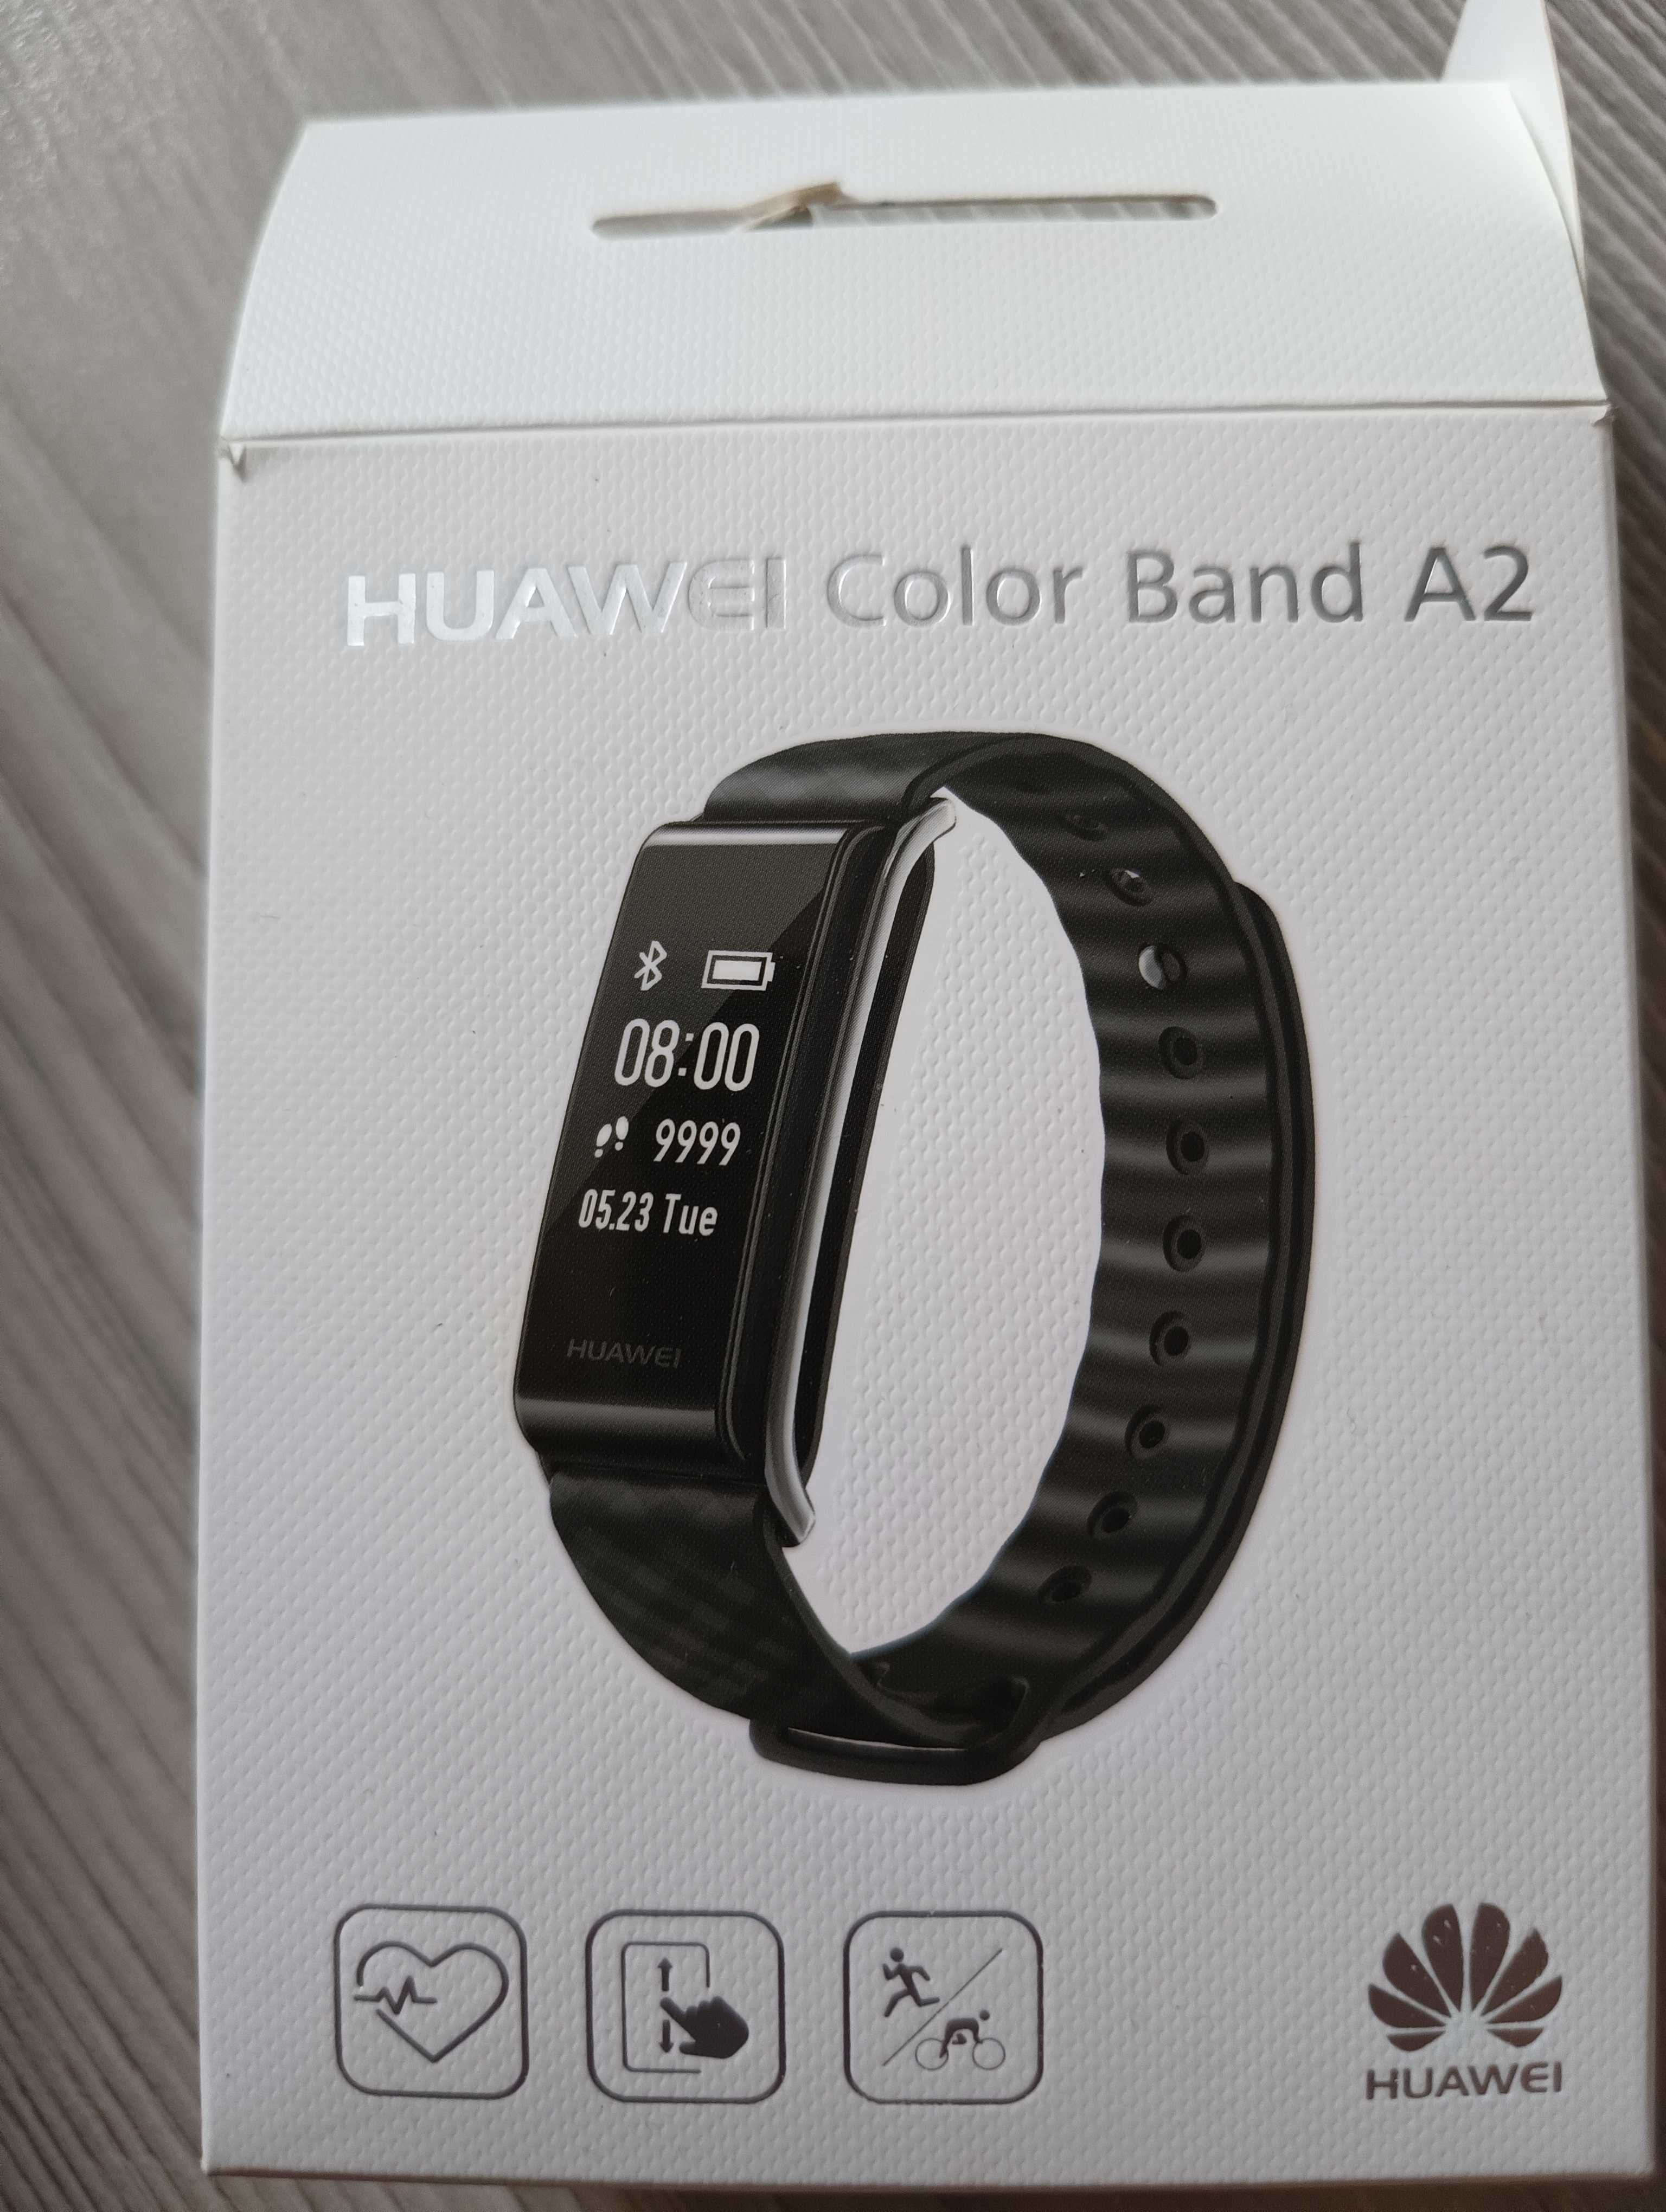 Huawei color band 2